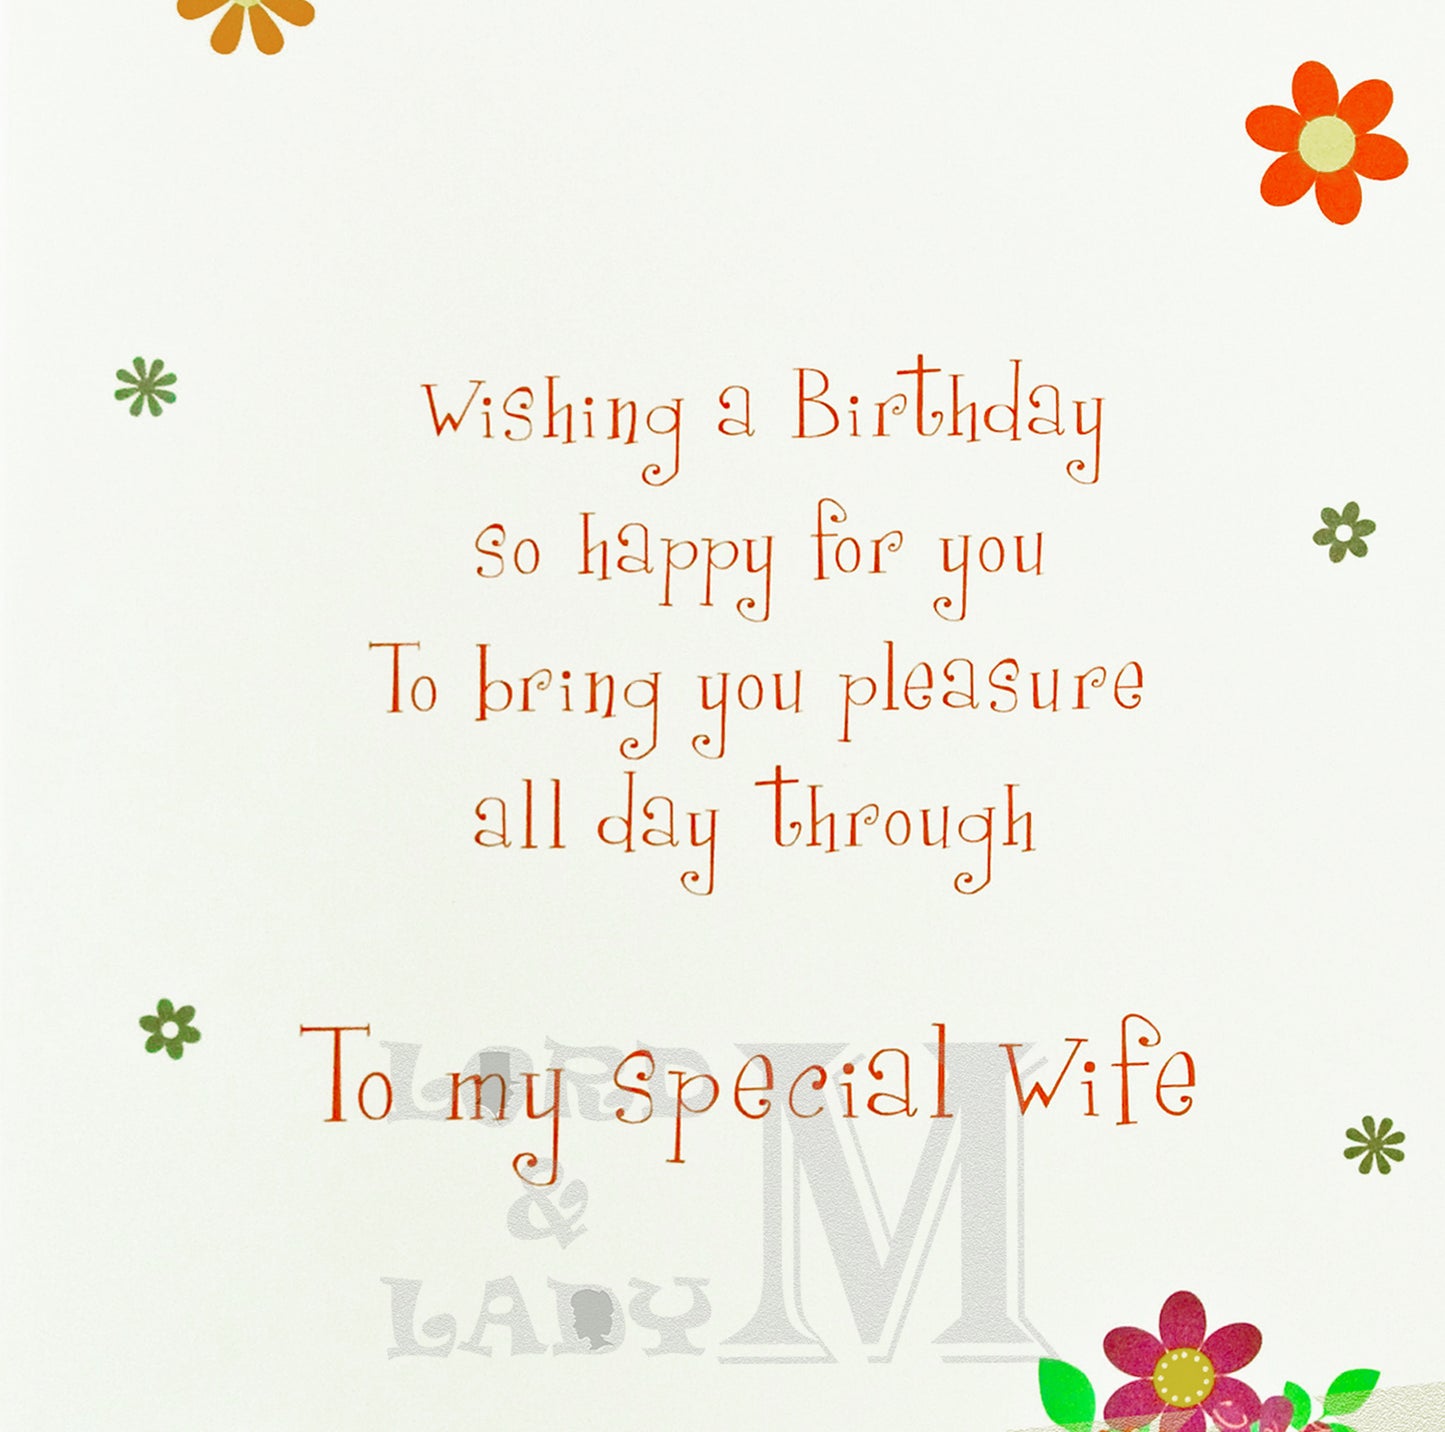 To My Special Wife on your Birthday